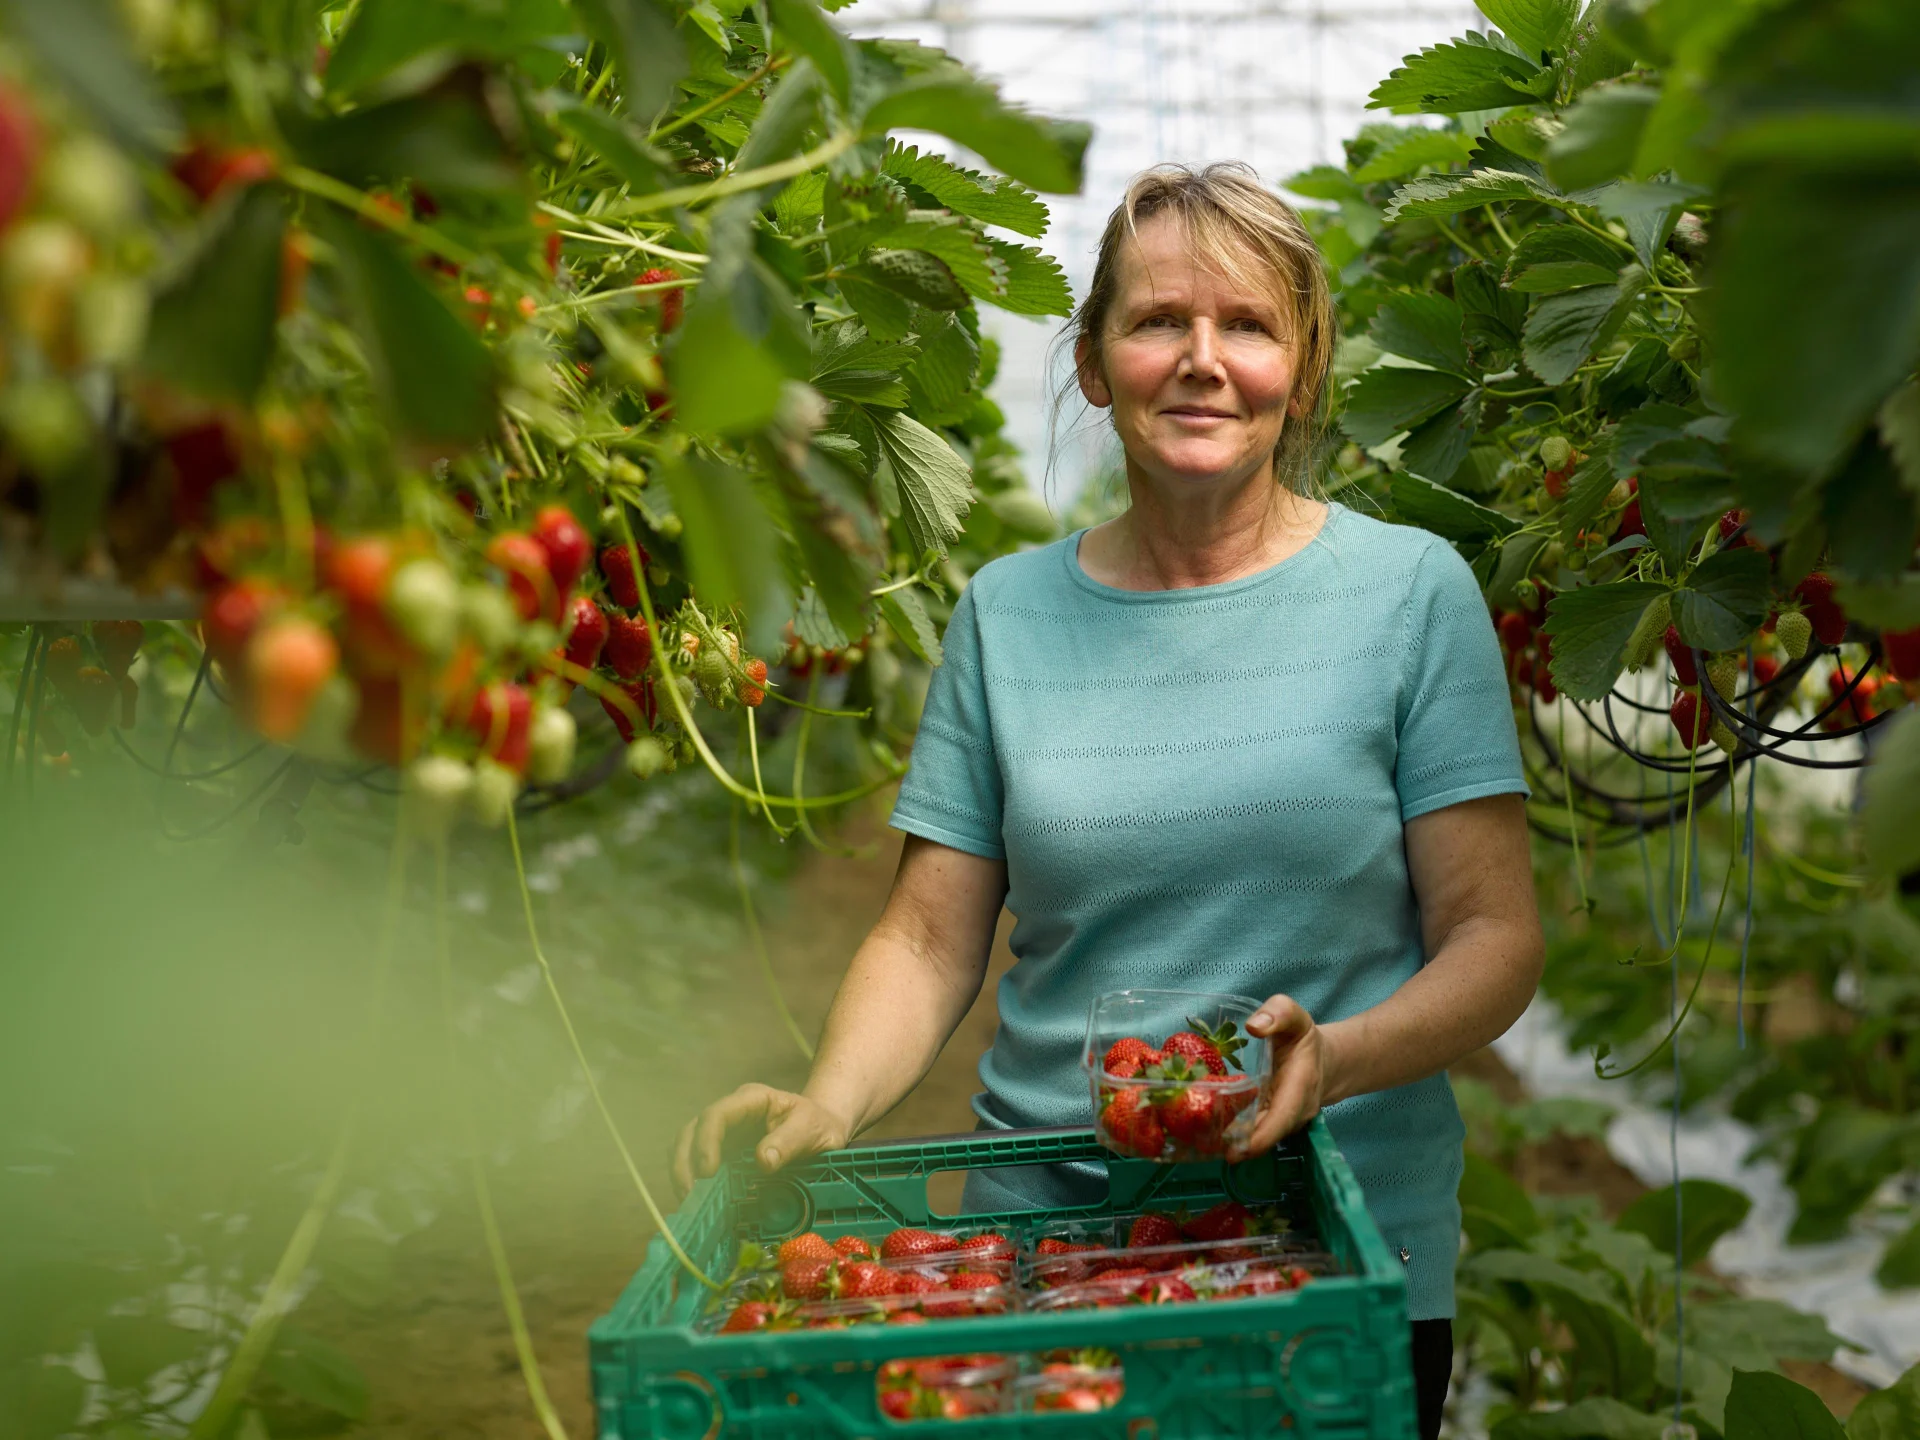 A woman standing in a field of tomatoes.